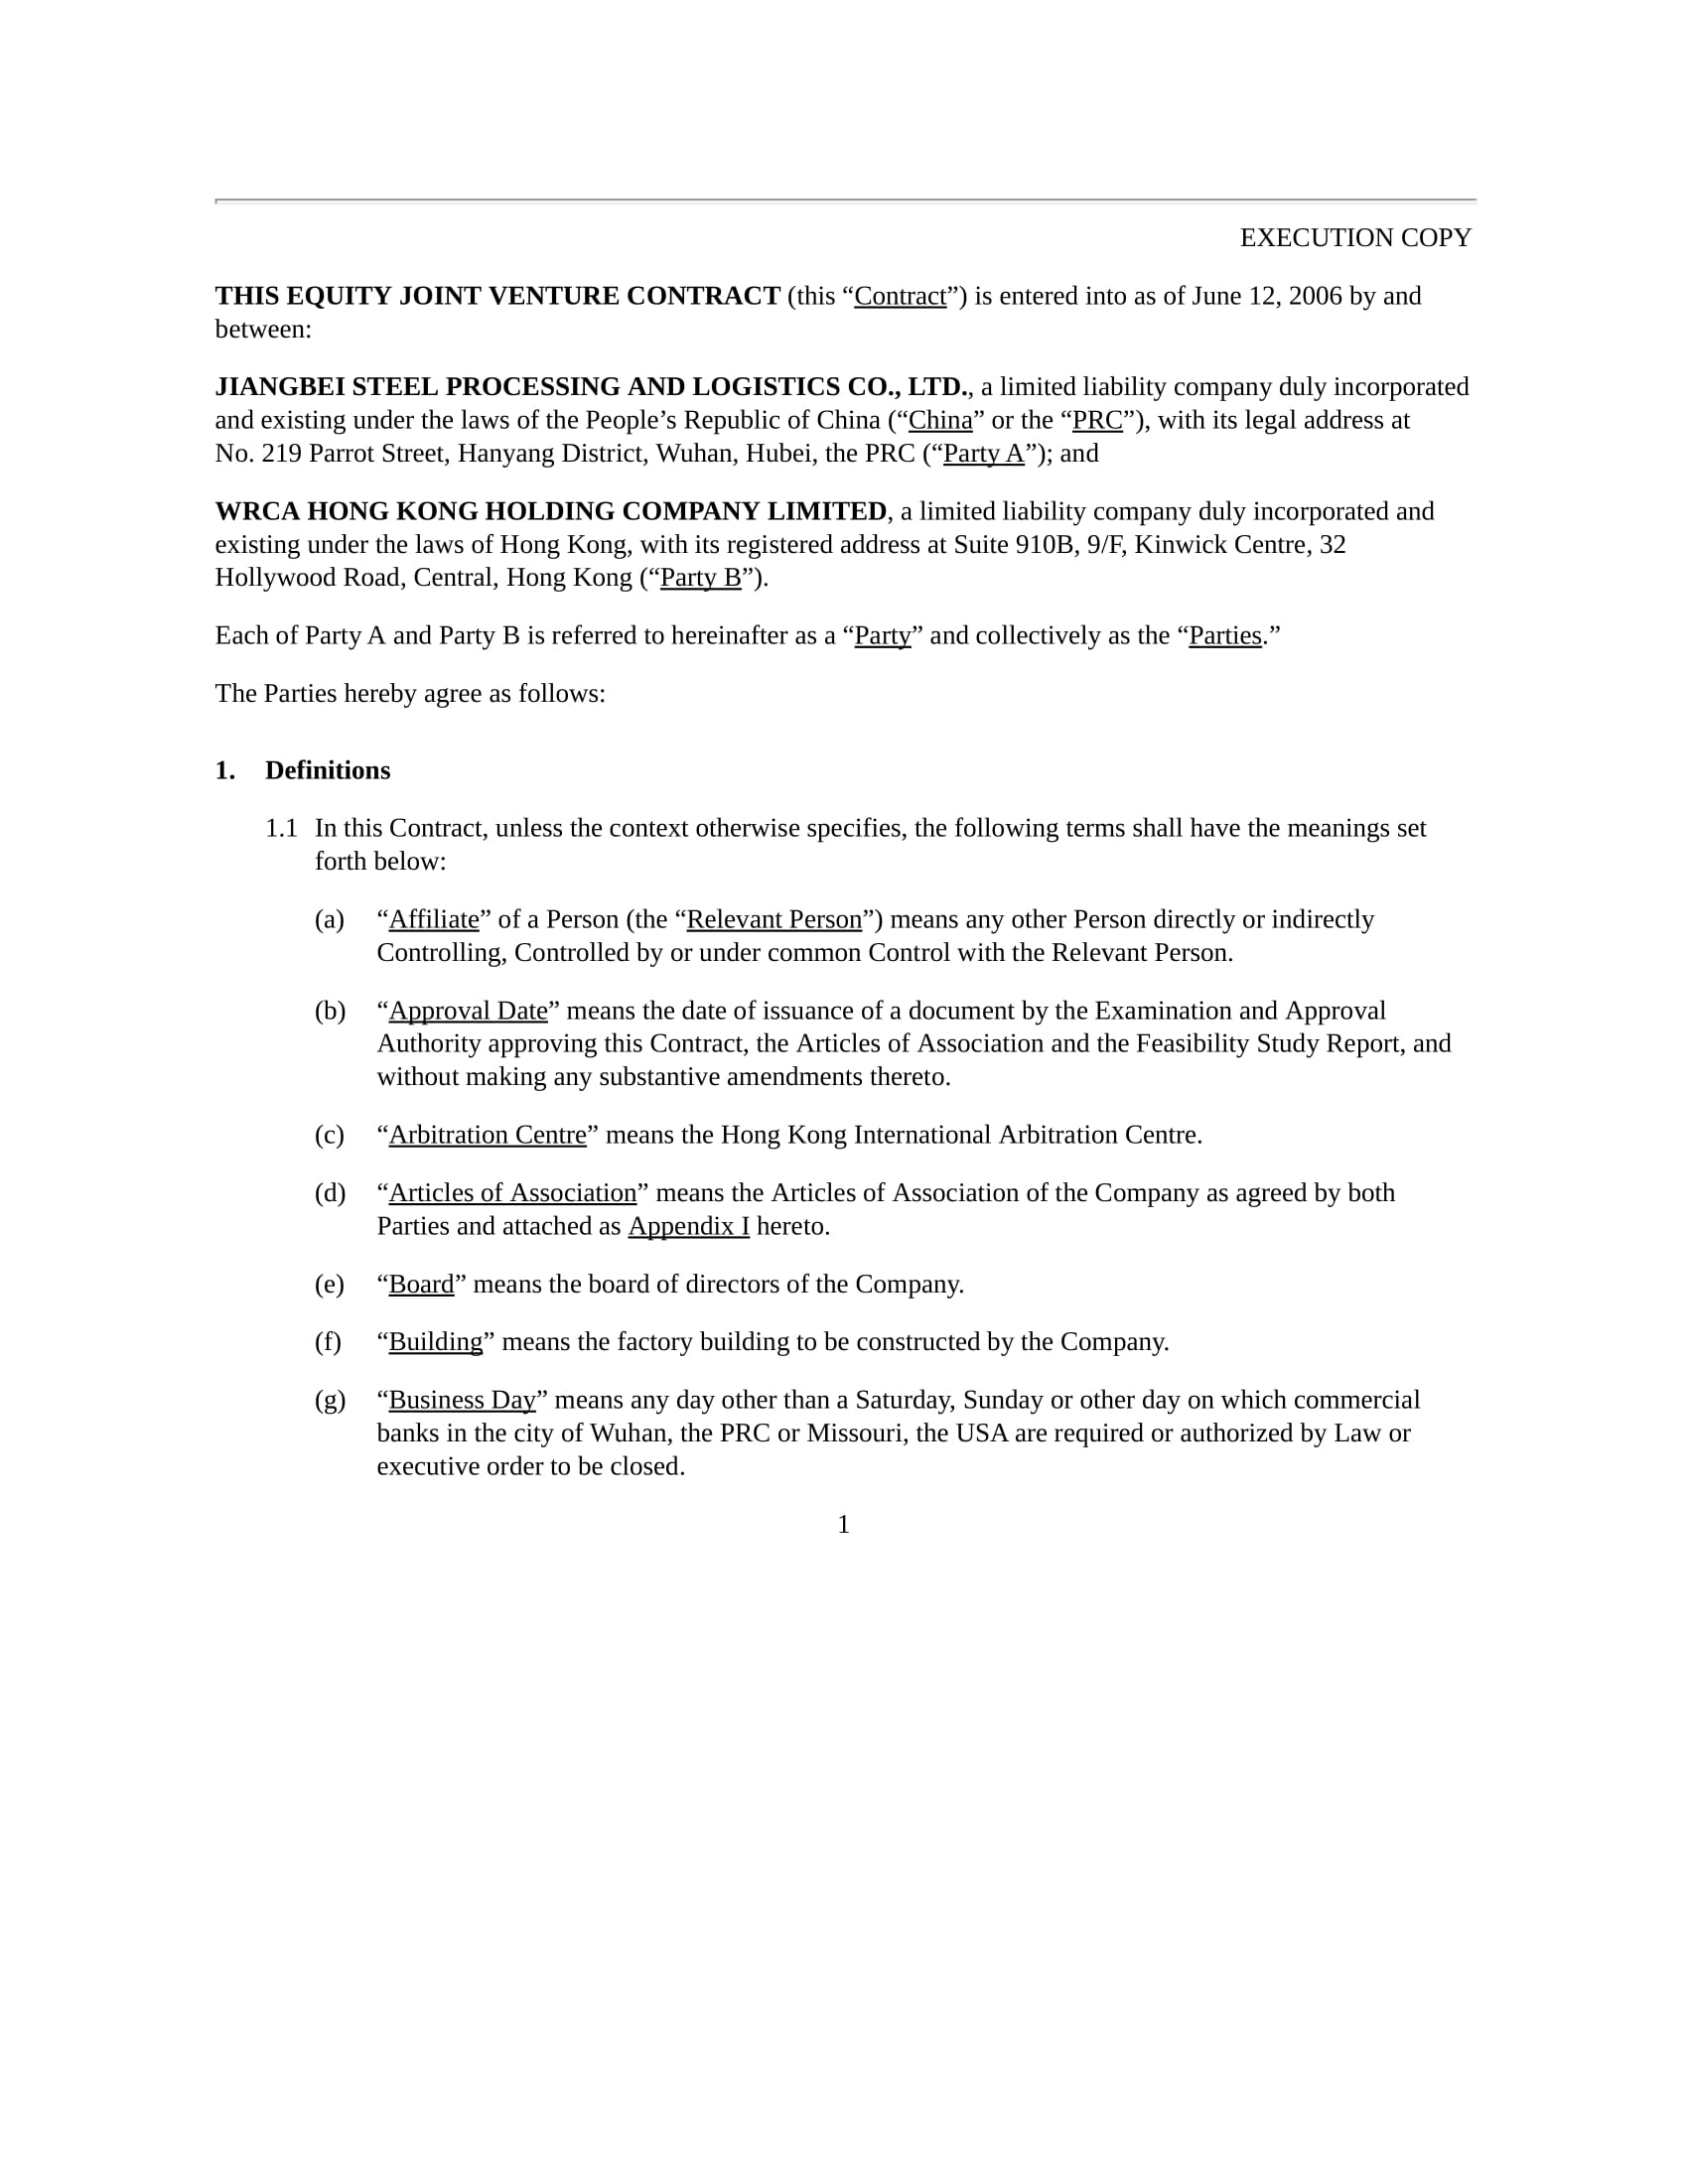 equity joint venture contract form 03